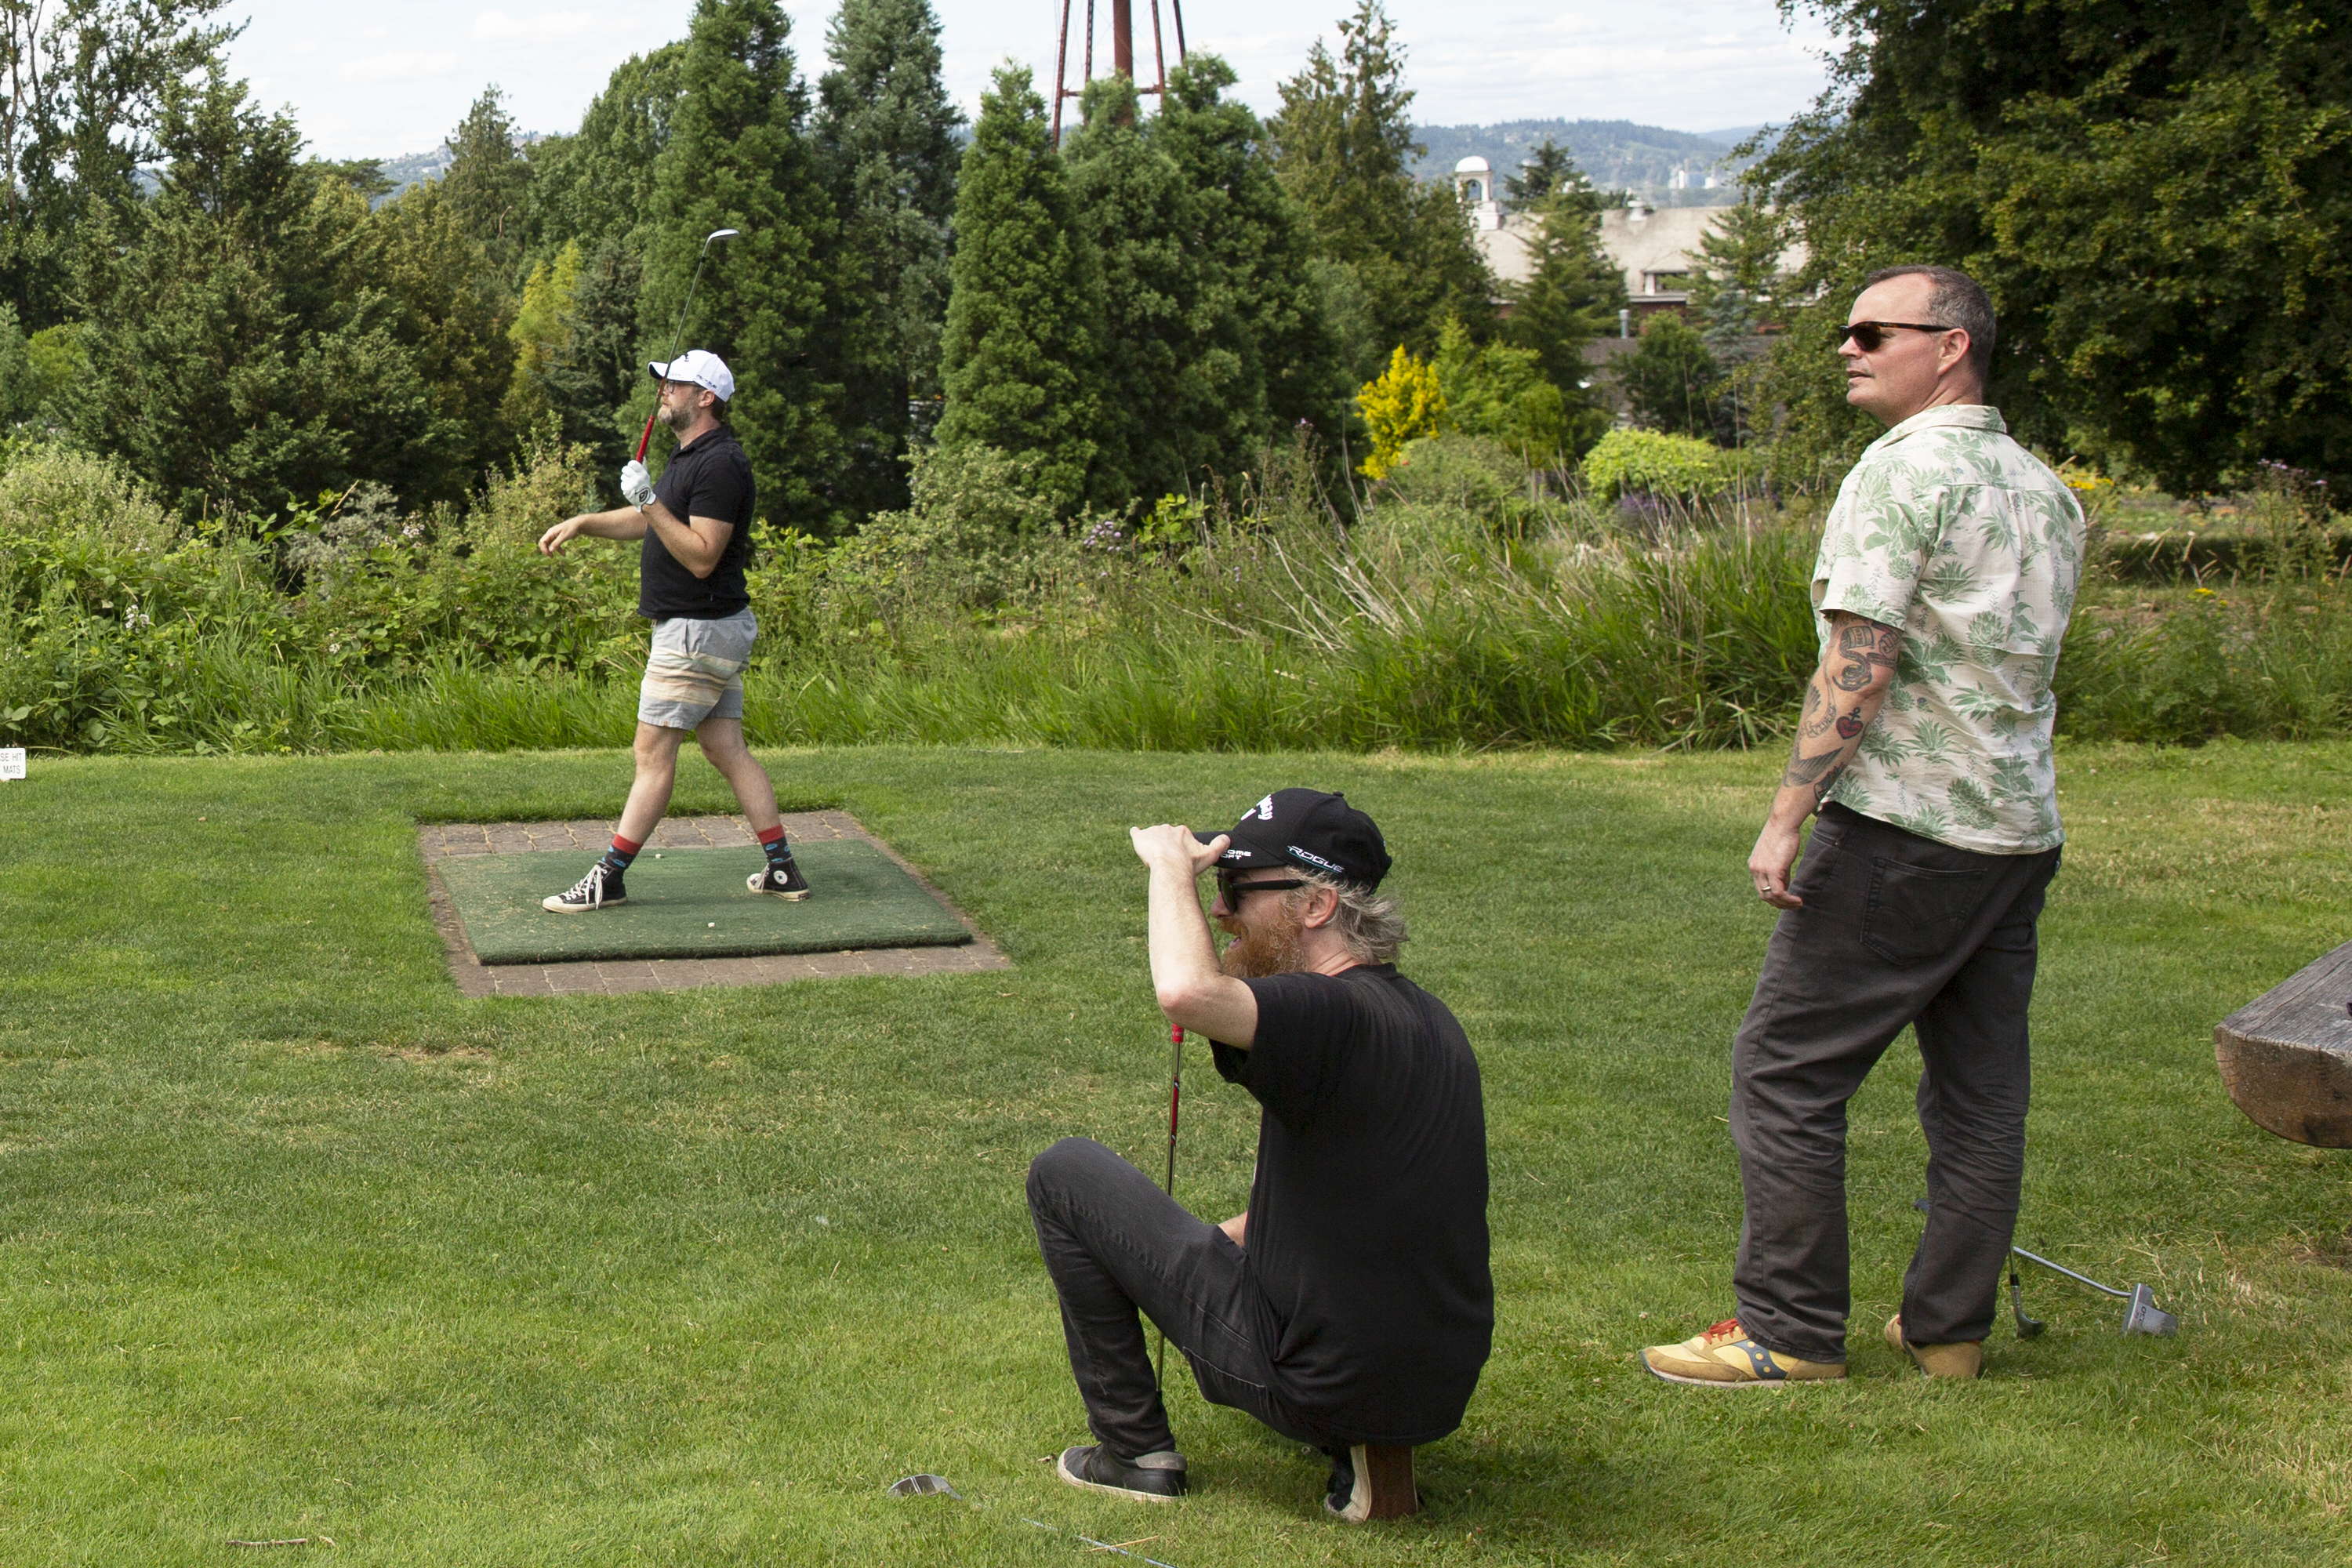 Red Fang eyeing down a tee shot